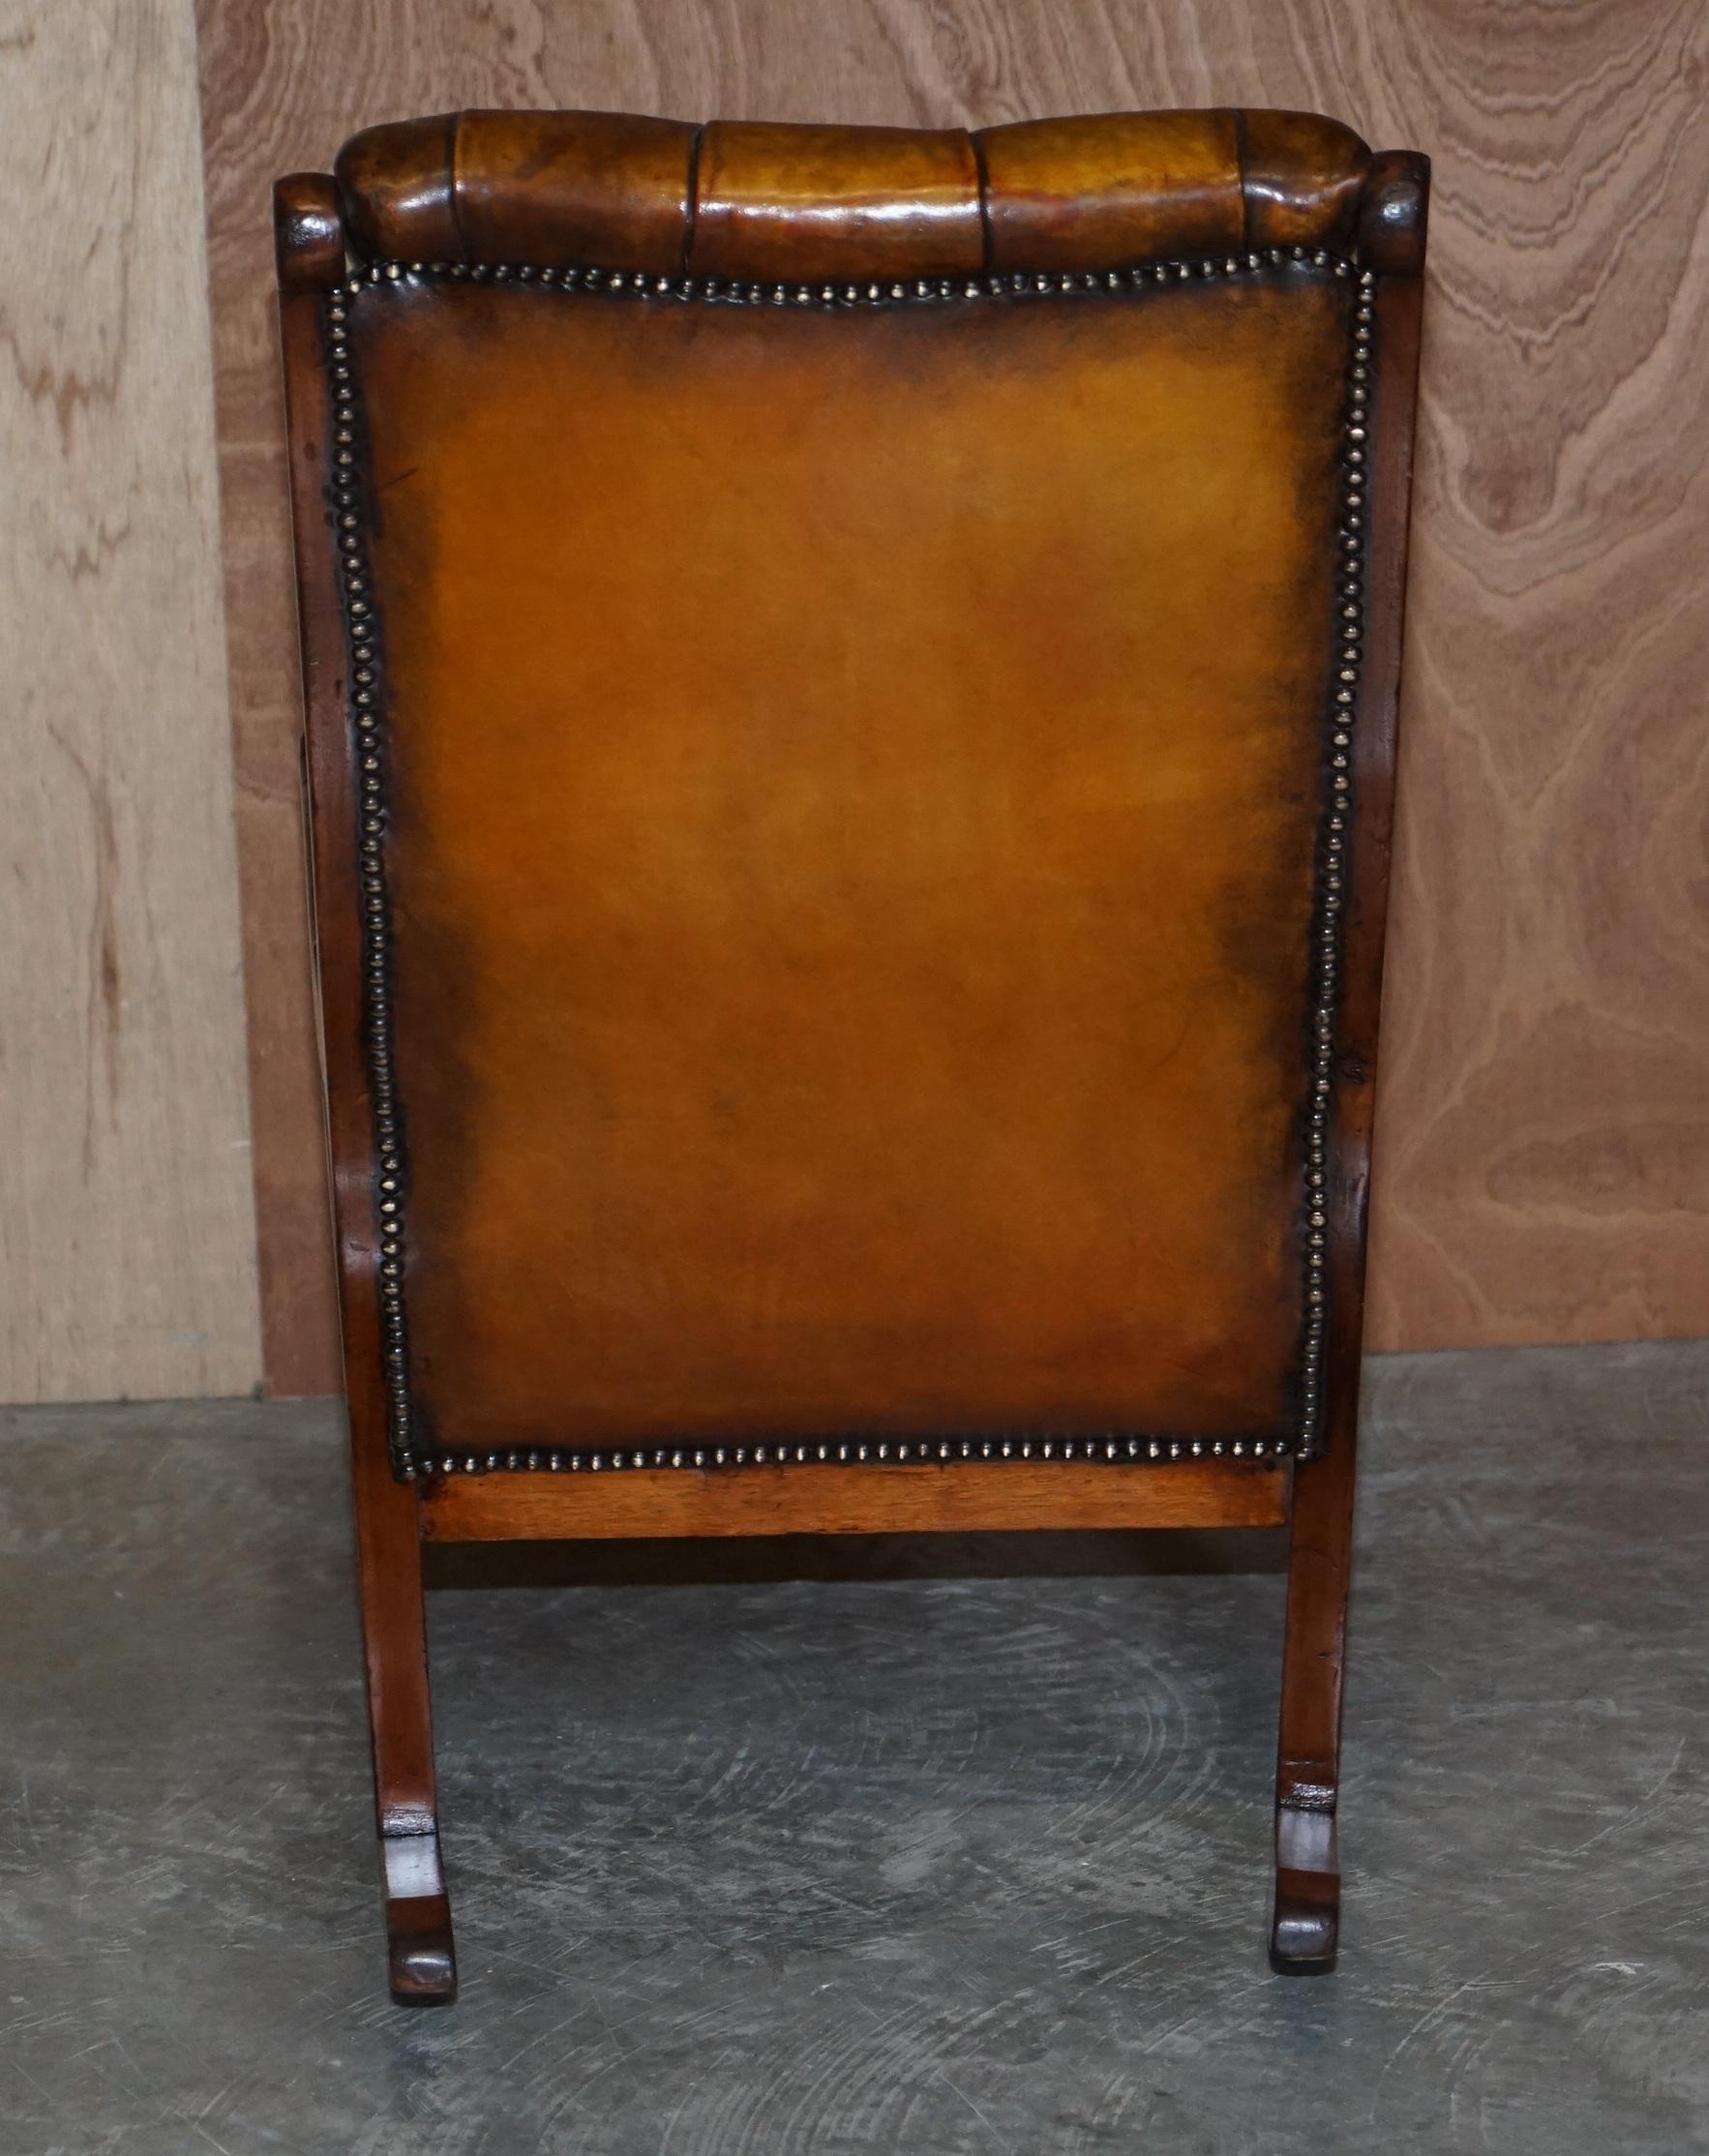 FINE ANTIQUE CIRCA 1900 HAND CARVED CHESTERFIELD BROWN LEATHER ROCKiNG ARMCHAIR 4